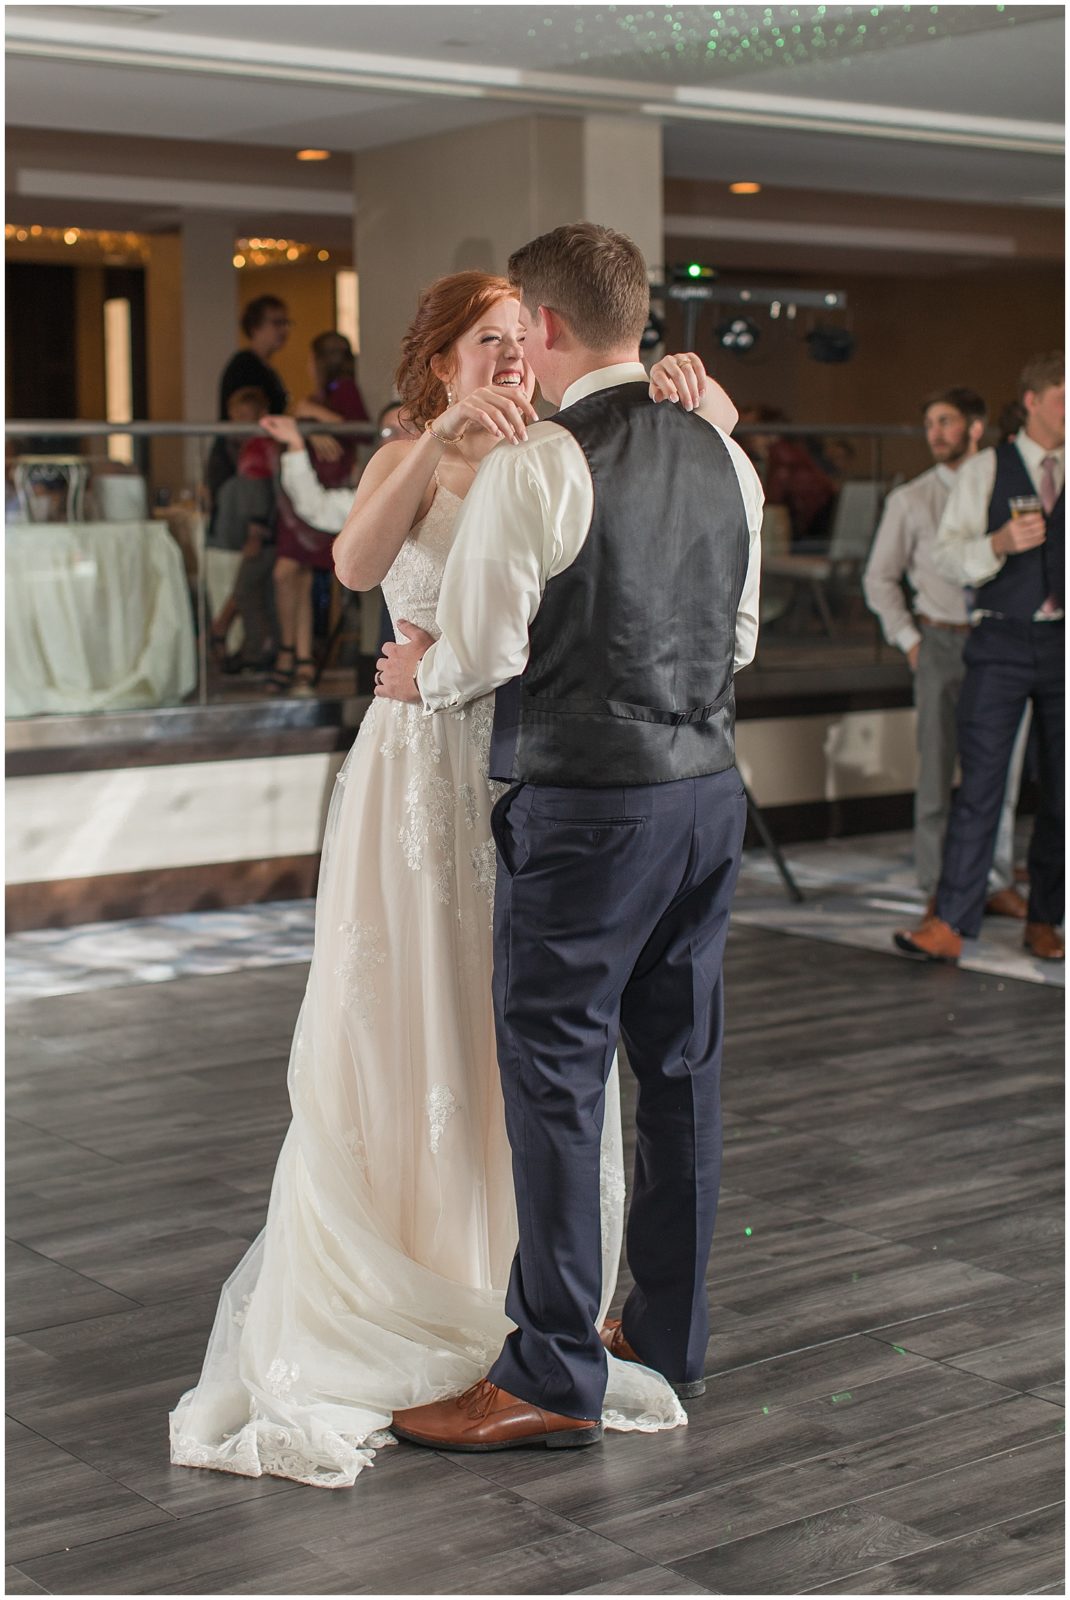 Reception | Wedding in Sioux City, Iowa shot by Jessica Brees Photography | Sioux City Wedding Photographer